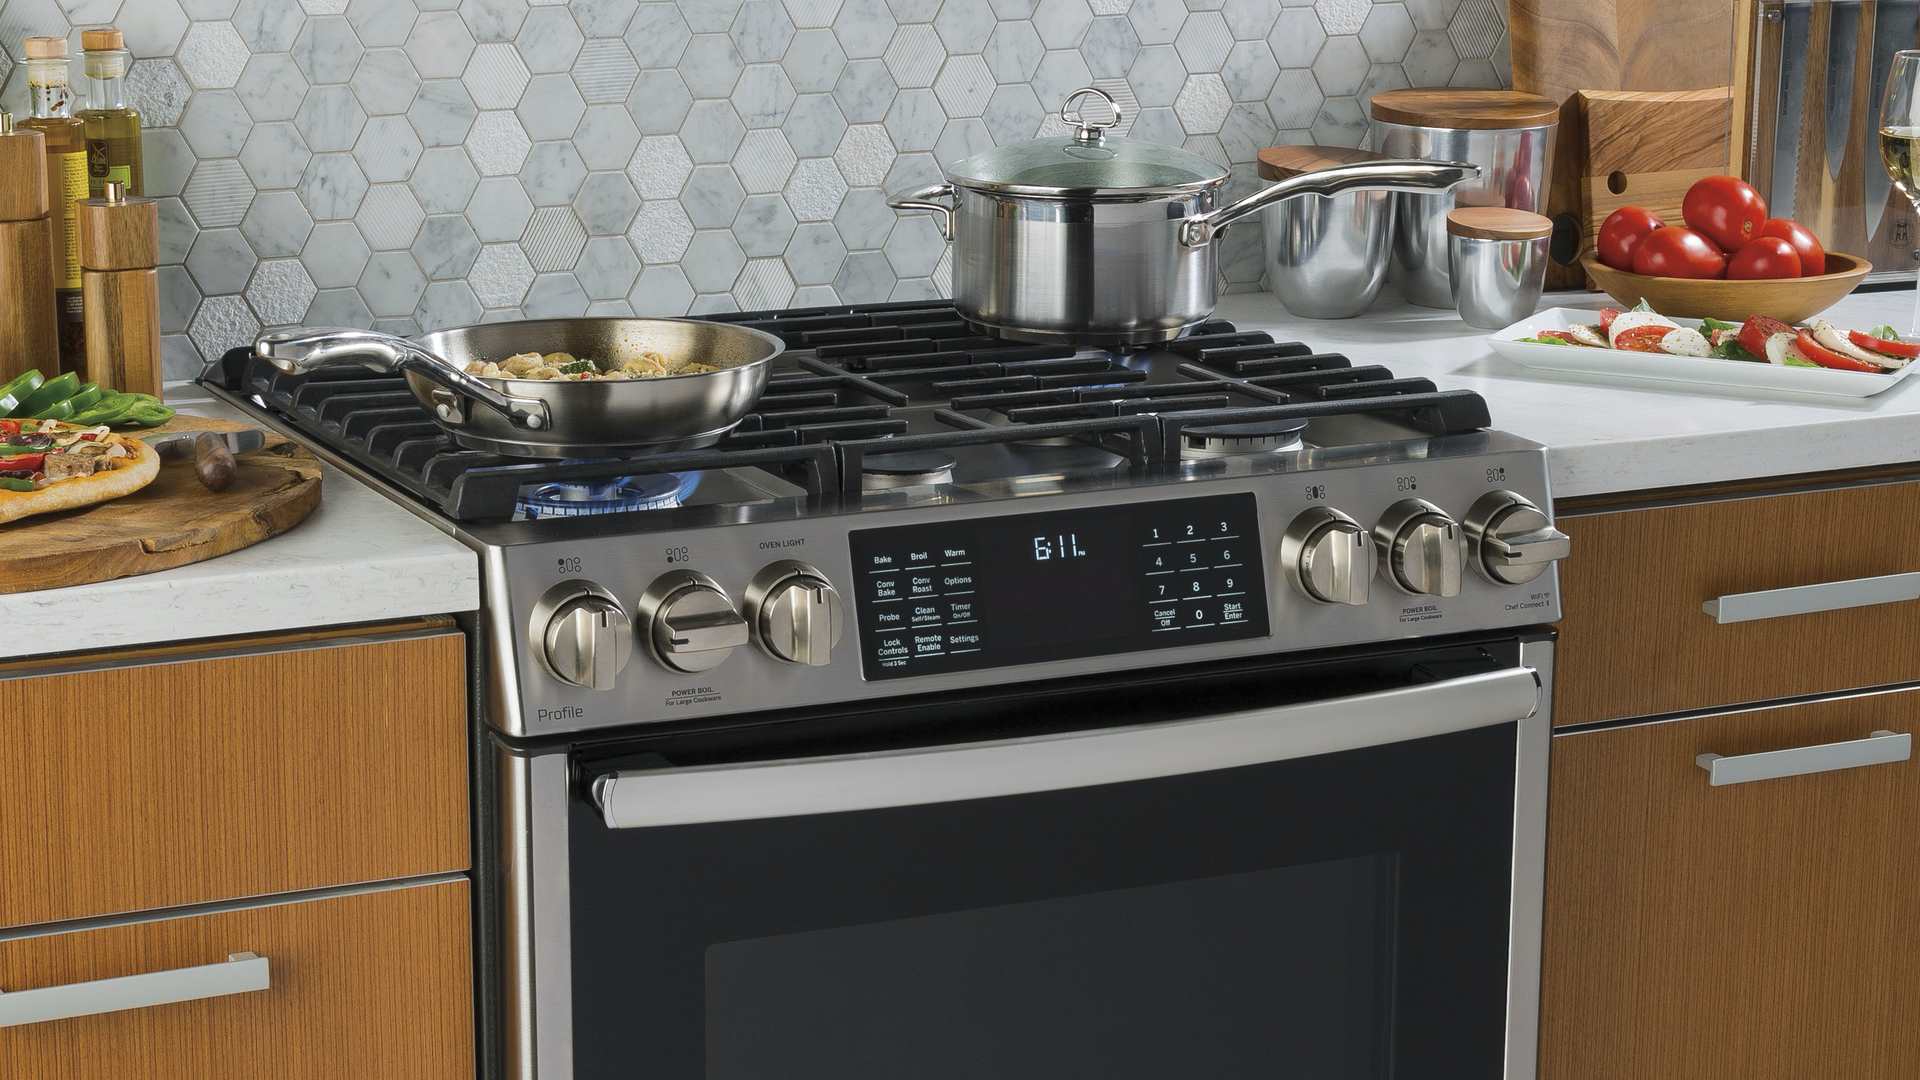 Electric countertop burners - Its types and features